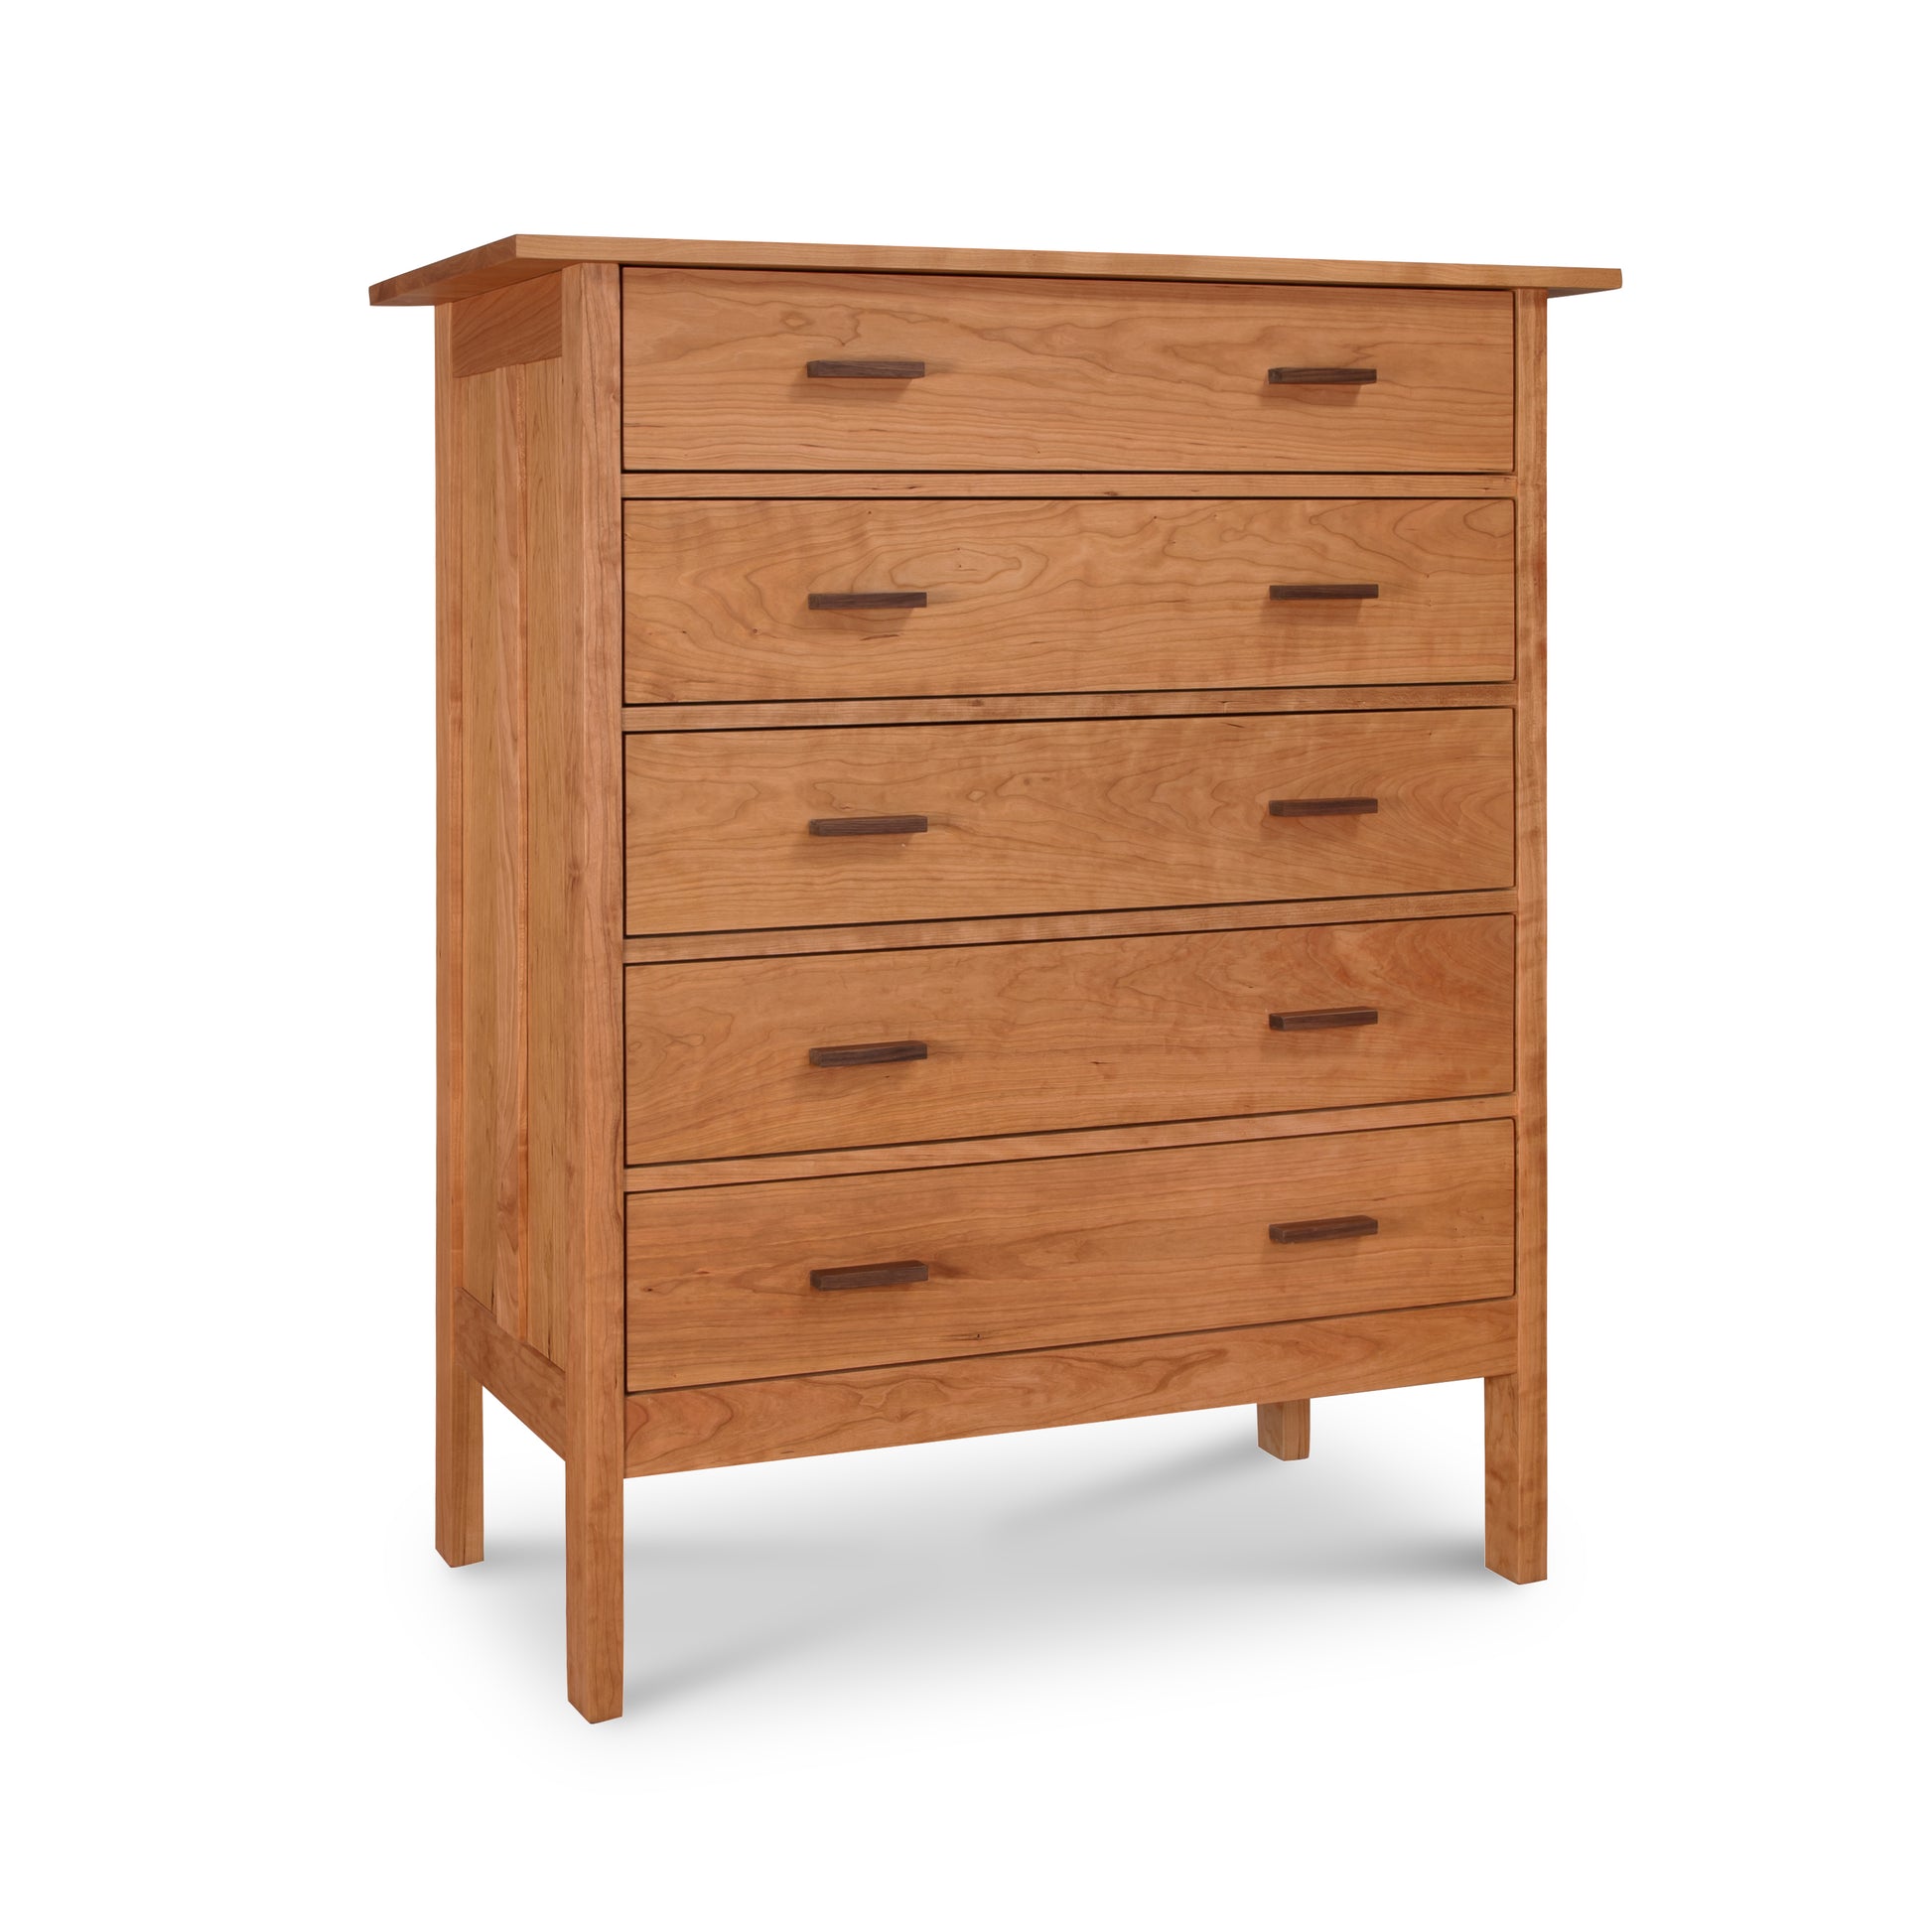 A wooden Modern Craftsman 5-Drawer Chest by Vermont Furniture Designs with simple handles and legs, isolated on a white background.